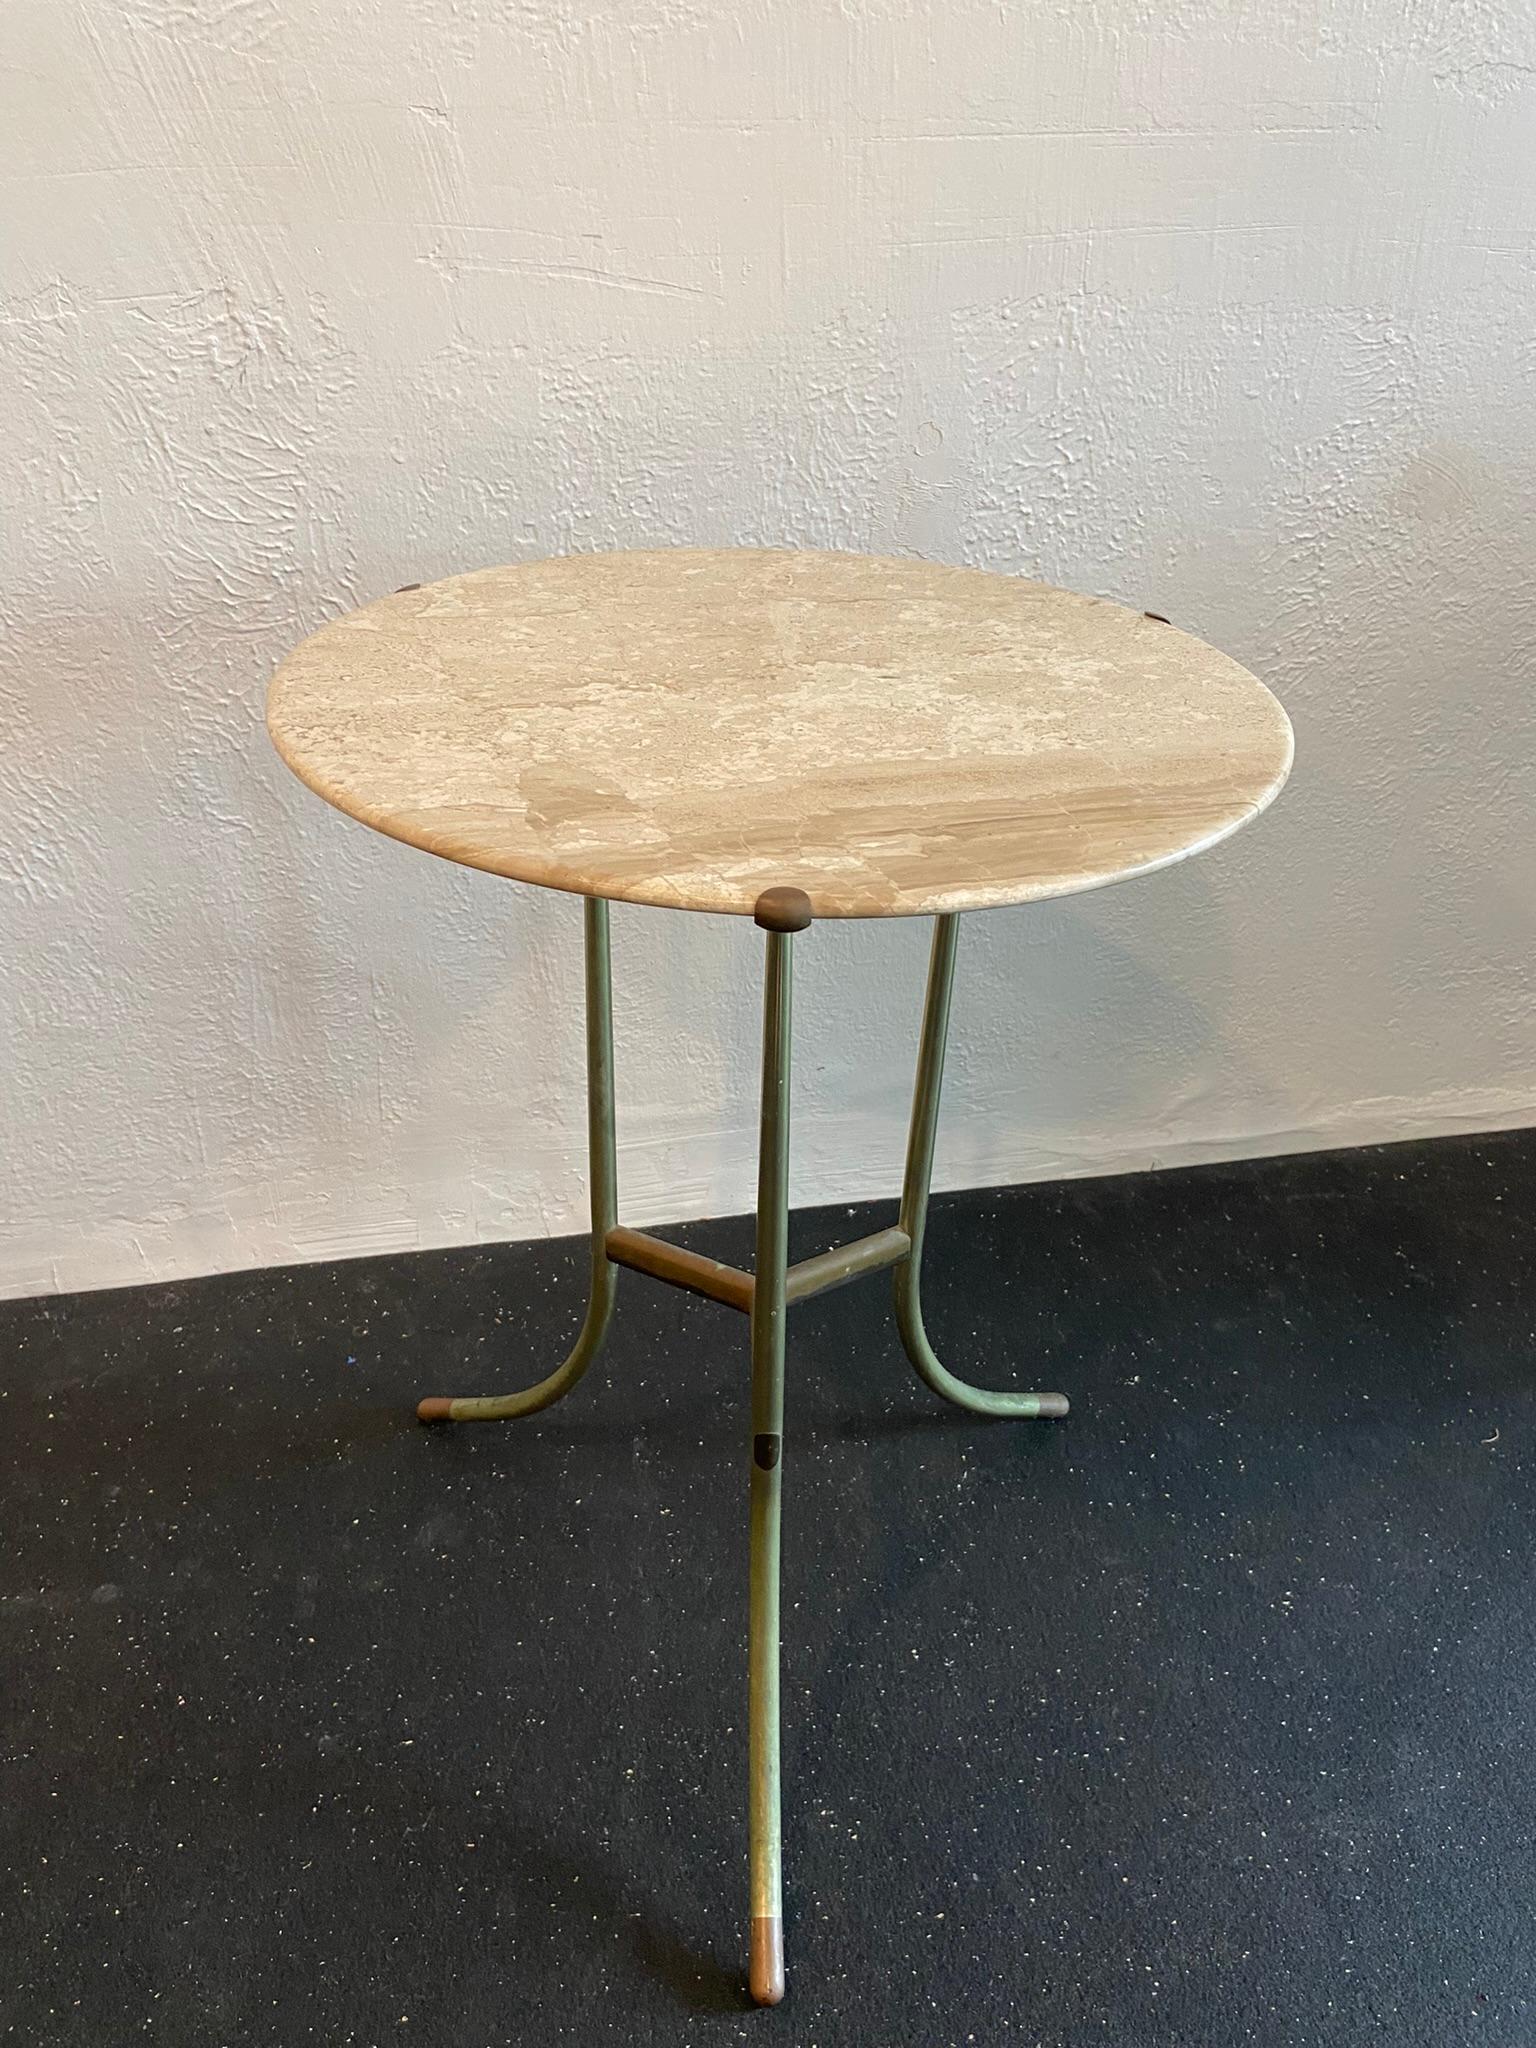 North American Early Cedric Hartman Marble and Mixed Metal “AE” Table For Sale